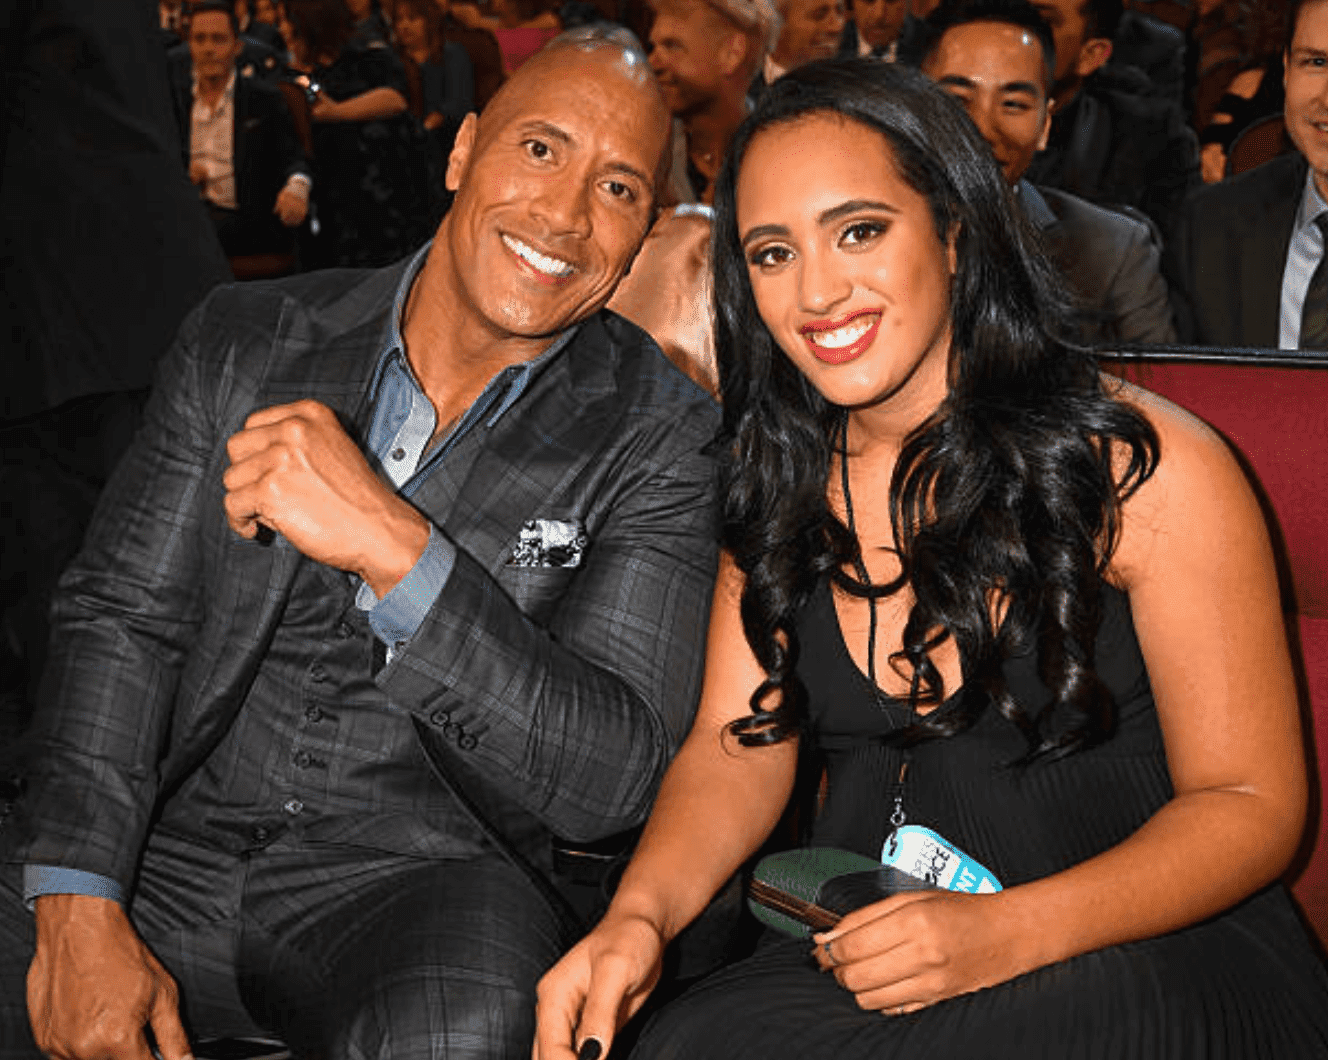 Dwayne Johnson attends the 2017 Peoples Choice Awards with daughter, Simone |Getty Images